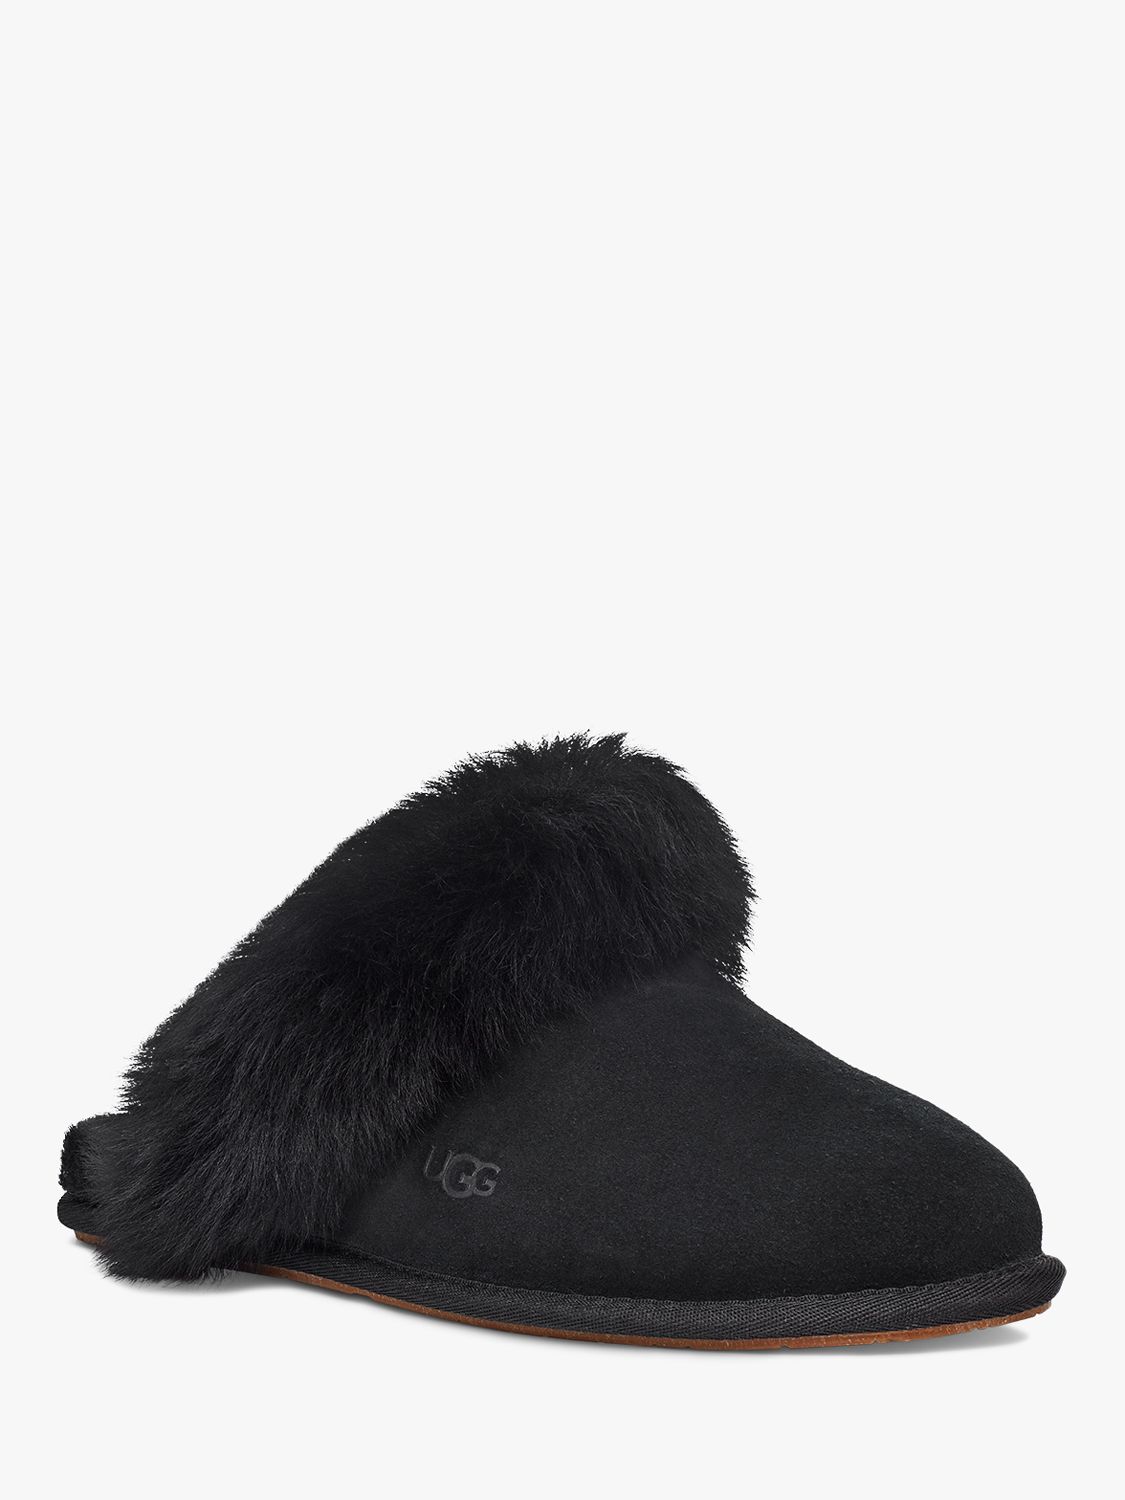 UGG Scuff Sis Slippers, Black at John Lewis & Partners